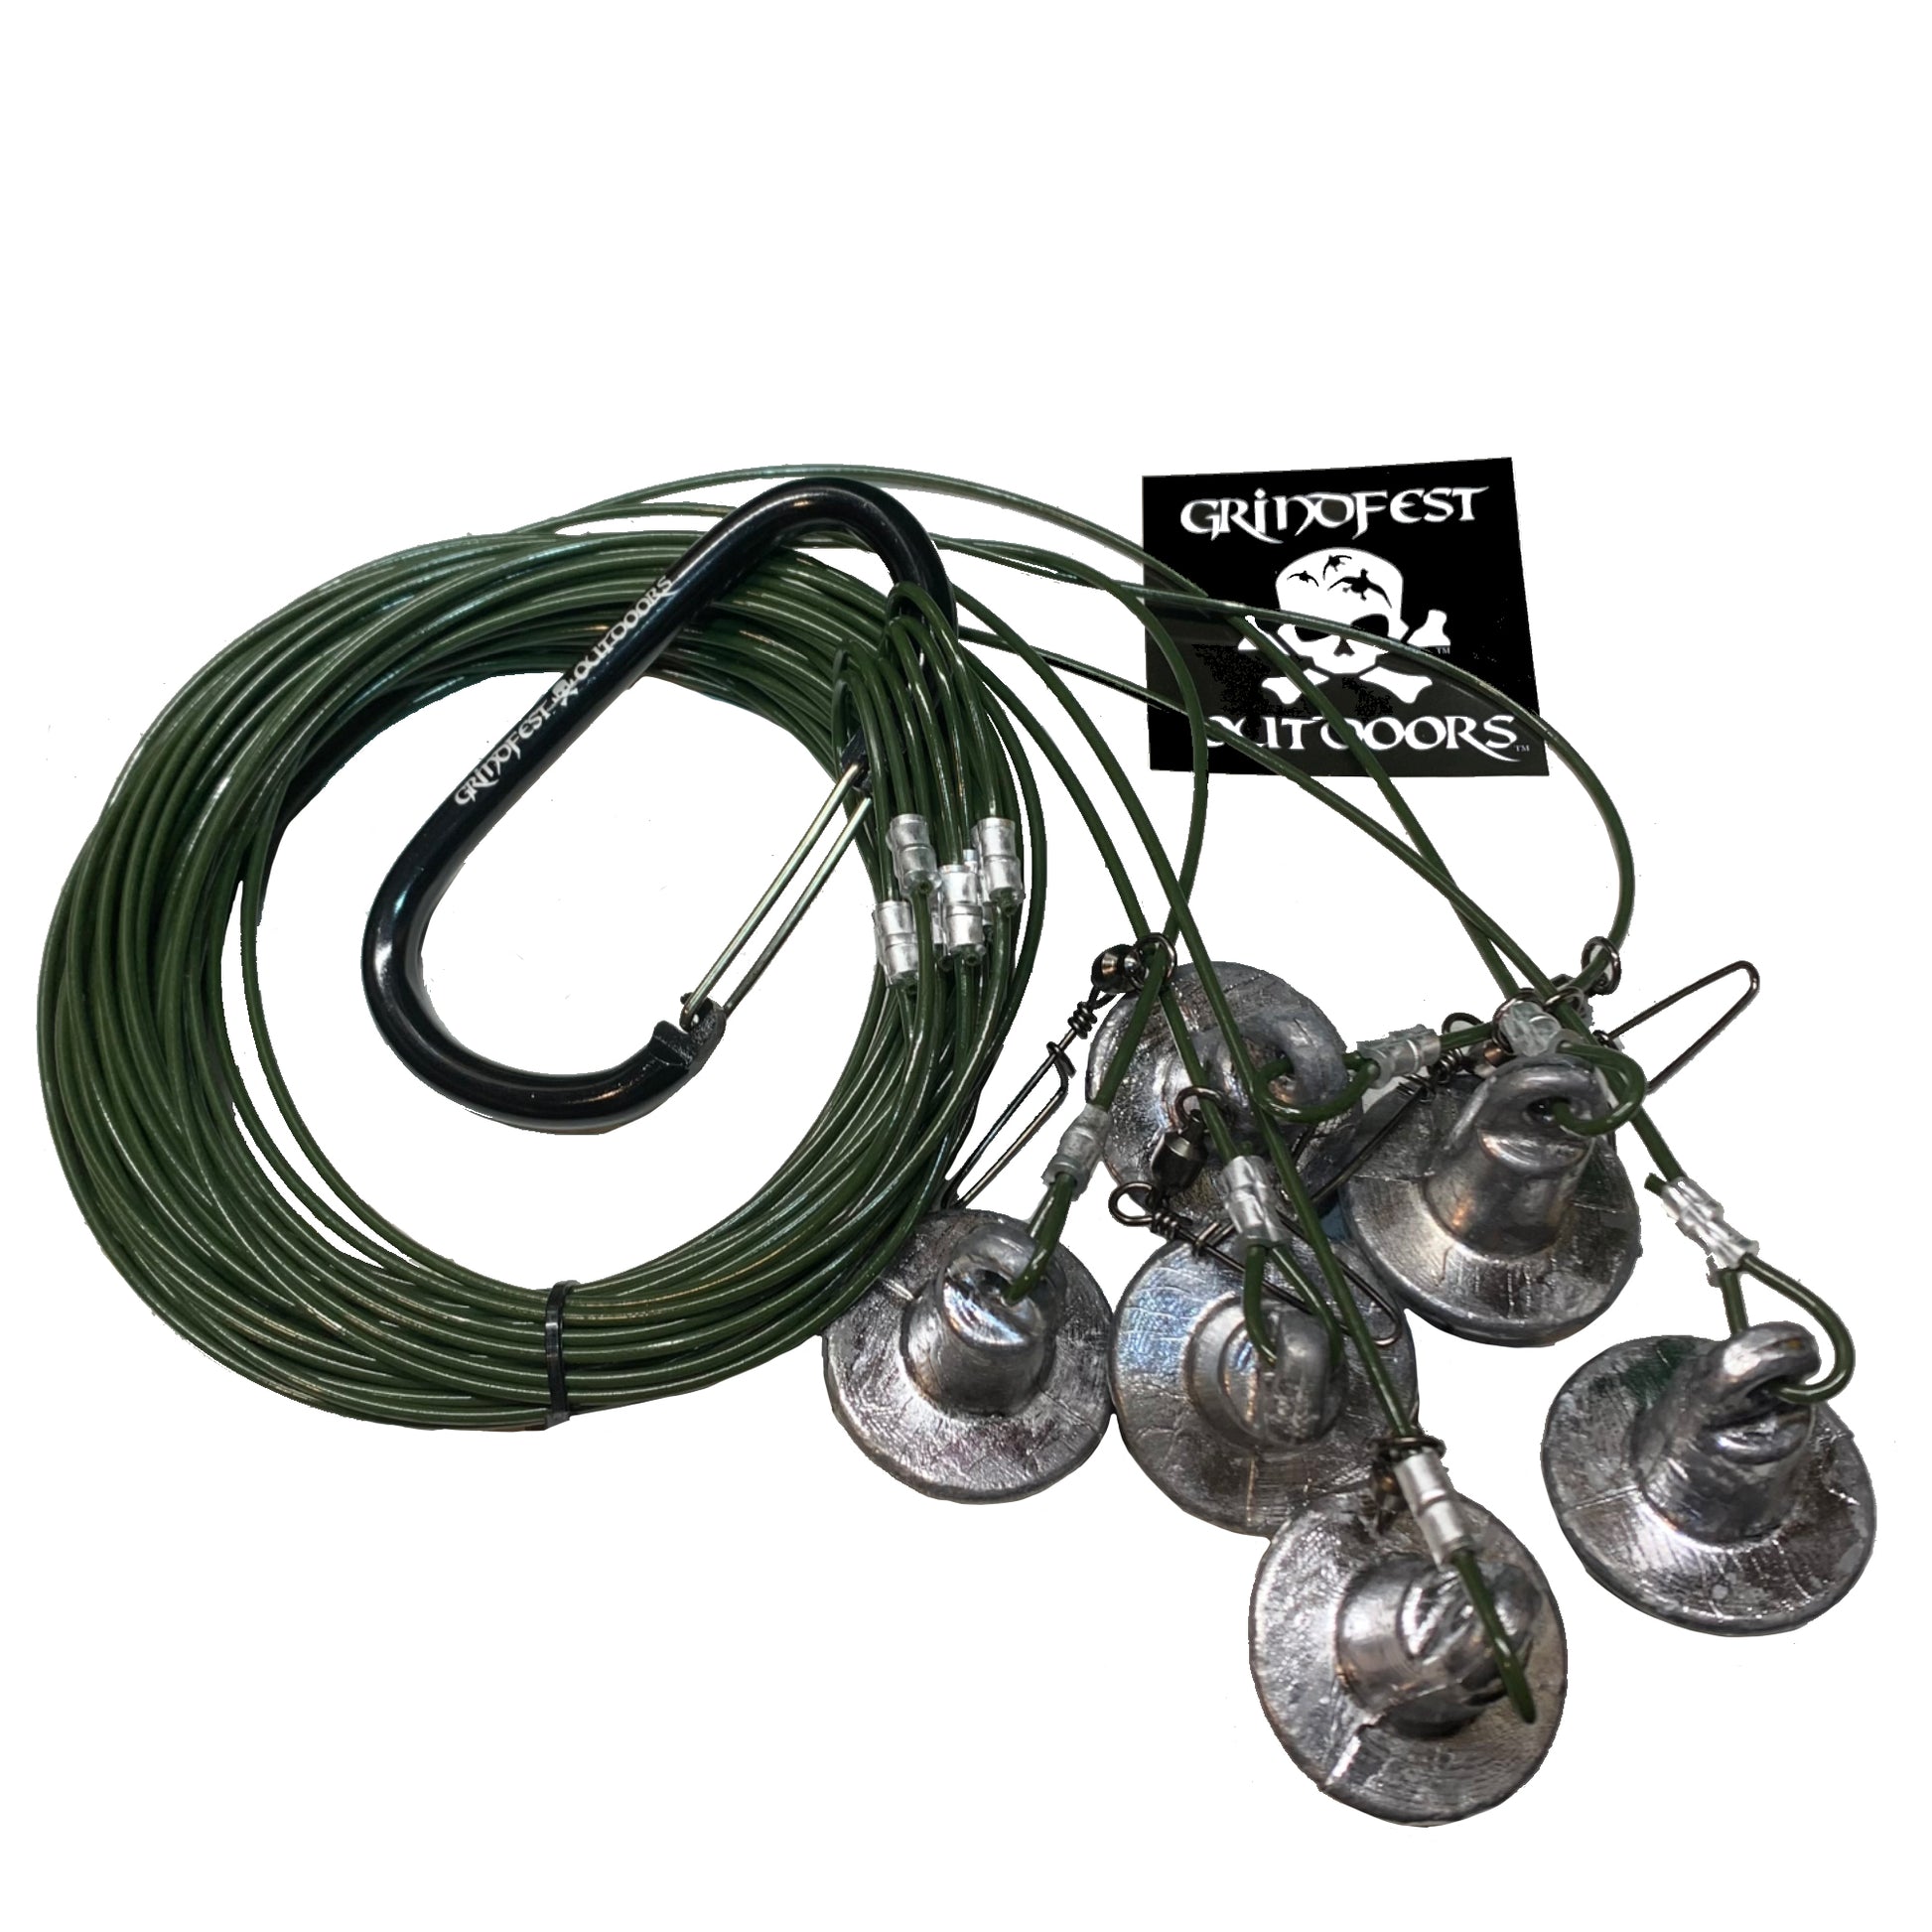 12oz Coated Steel Cable Texas Rigs (Half Dozen) – GrindFest Outdoors